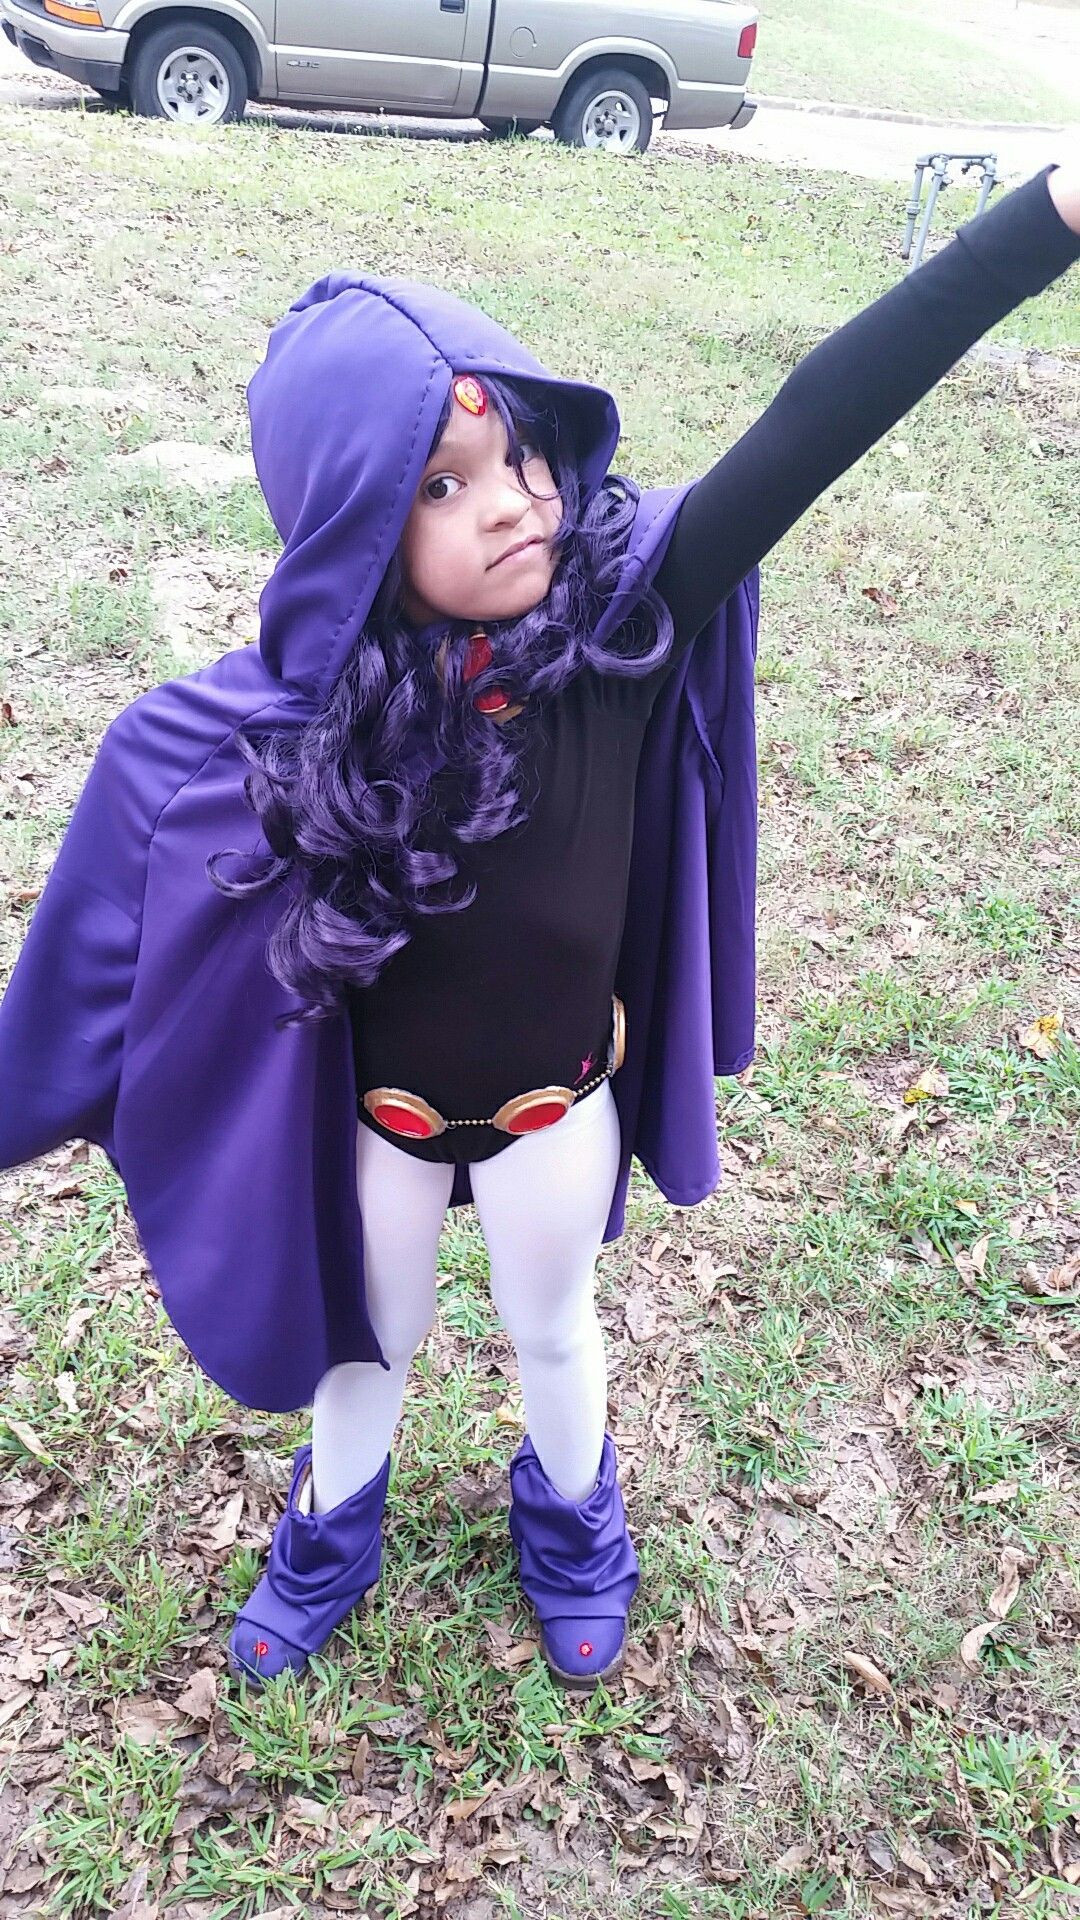 DIY Raven Costume
 Diy raven costume With images